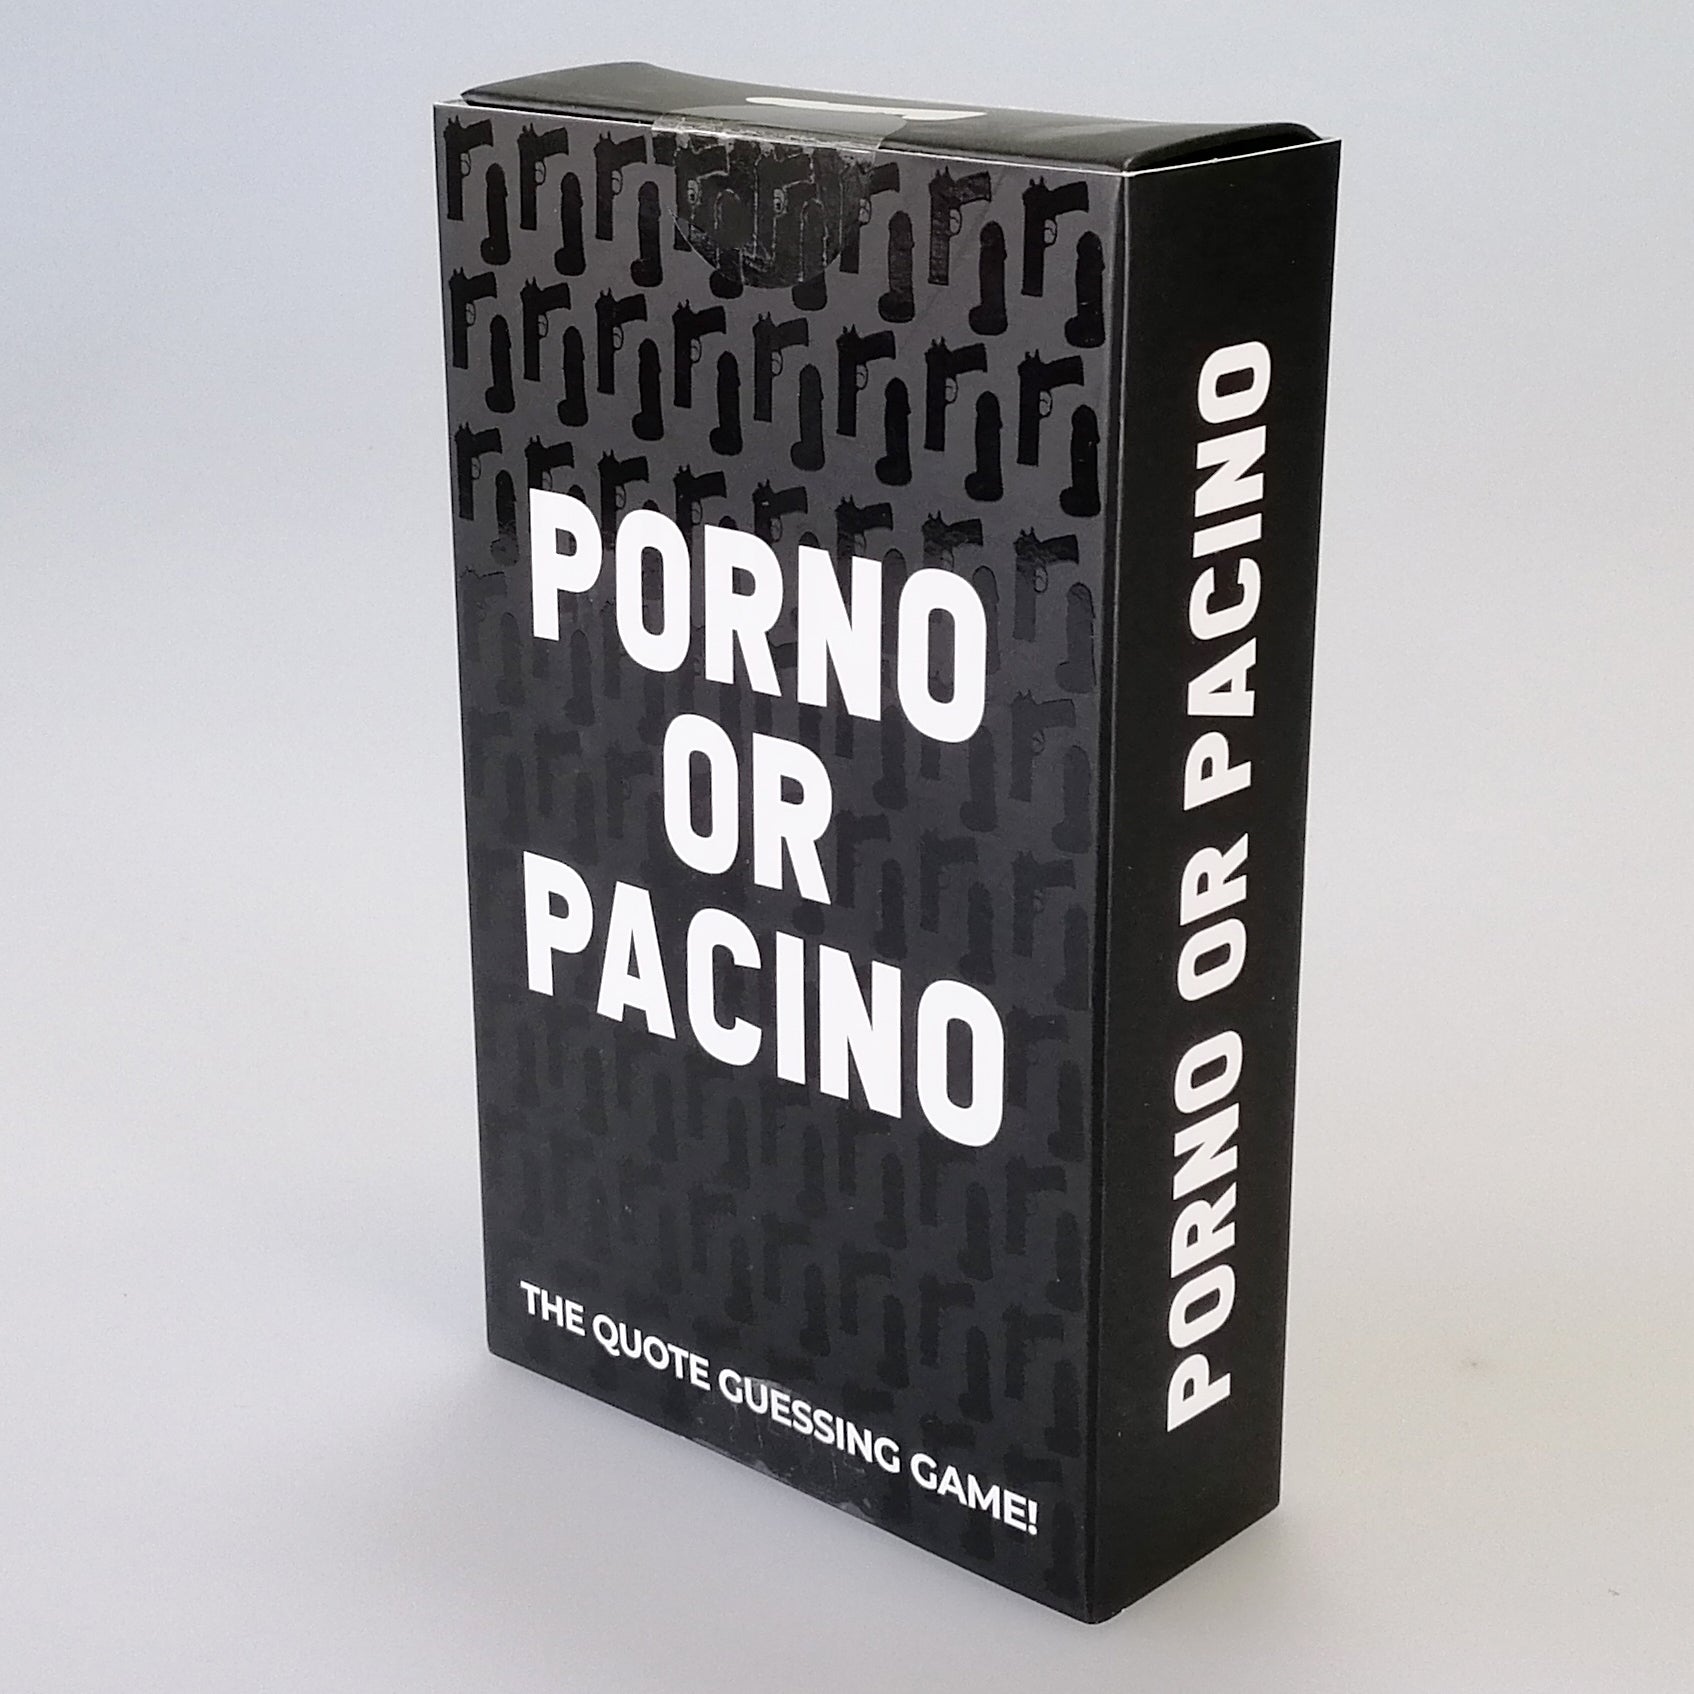 Porno or Pacino - Quote Guessing Game